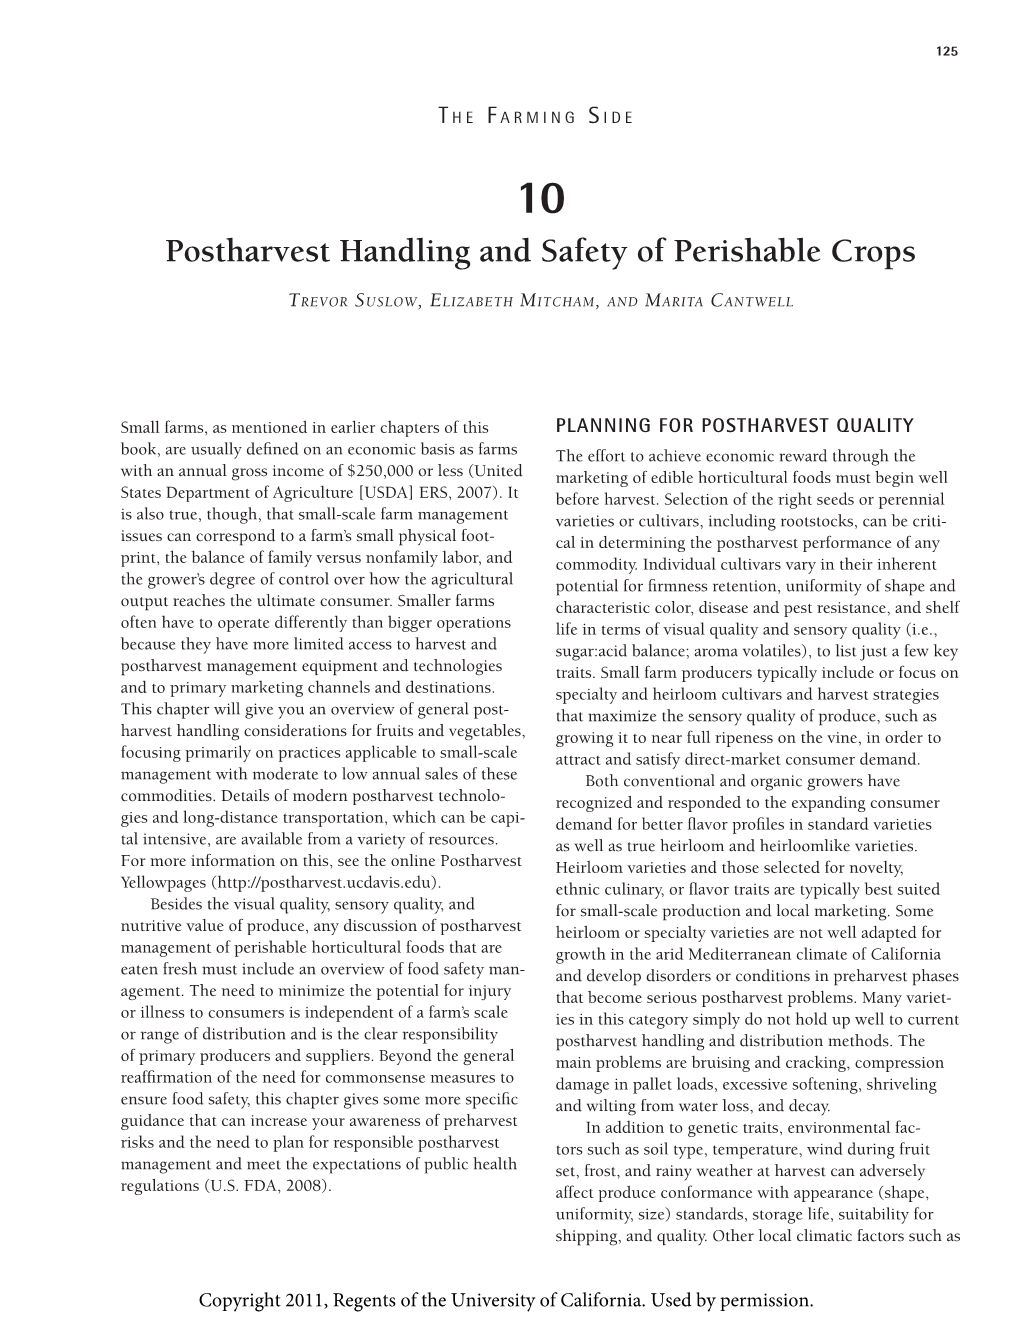 Postharvest Handling and Safety of Perishable Crops